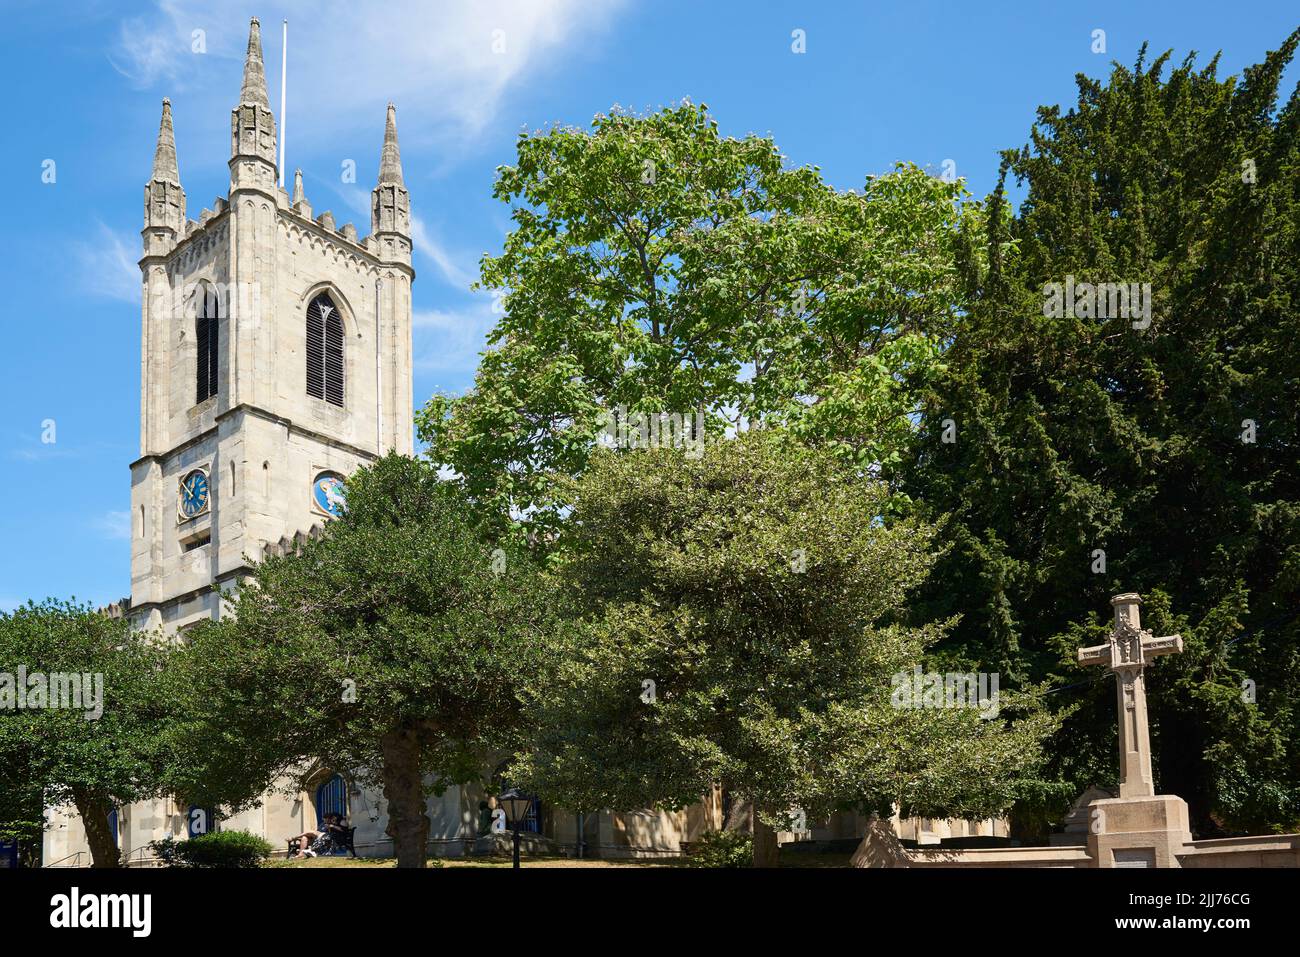 The tower and churchyard of St John the Baptist, Windsor, Berkshire, South East England Stock Photo